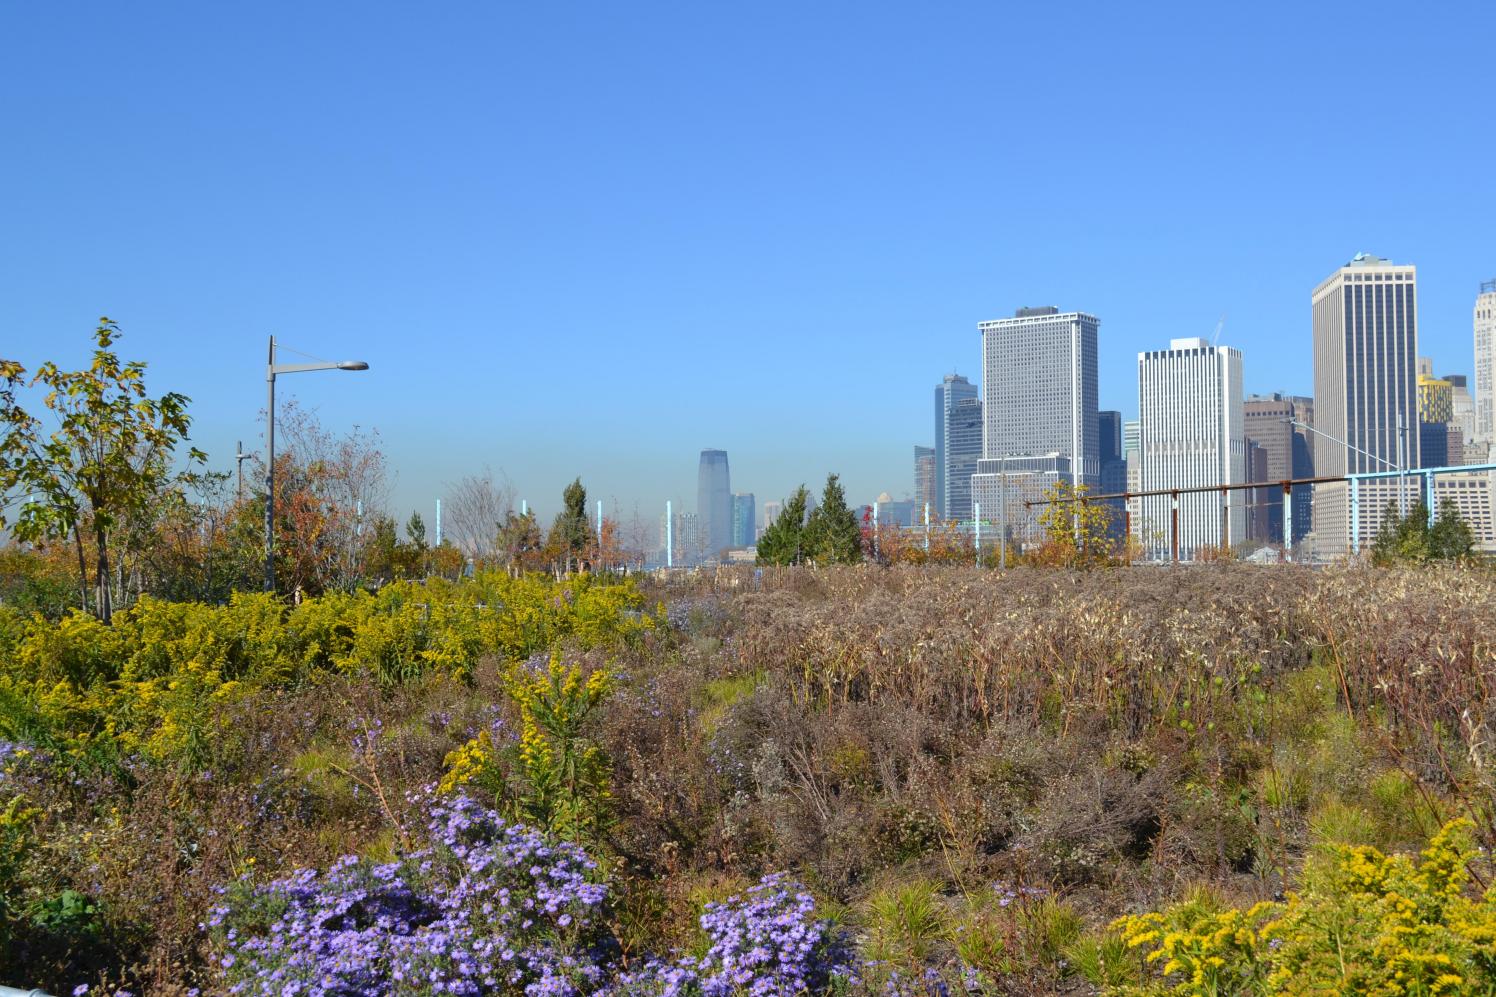 Pier 6 Flower Field with purple flowers and lower Manhattan in the distance.